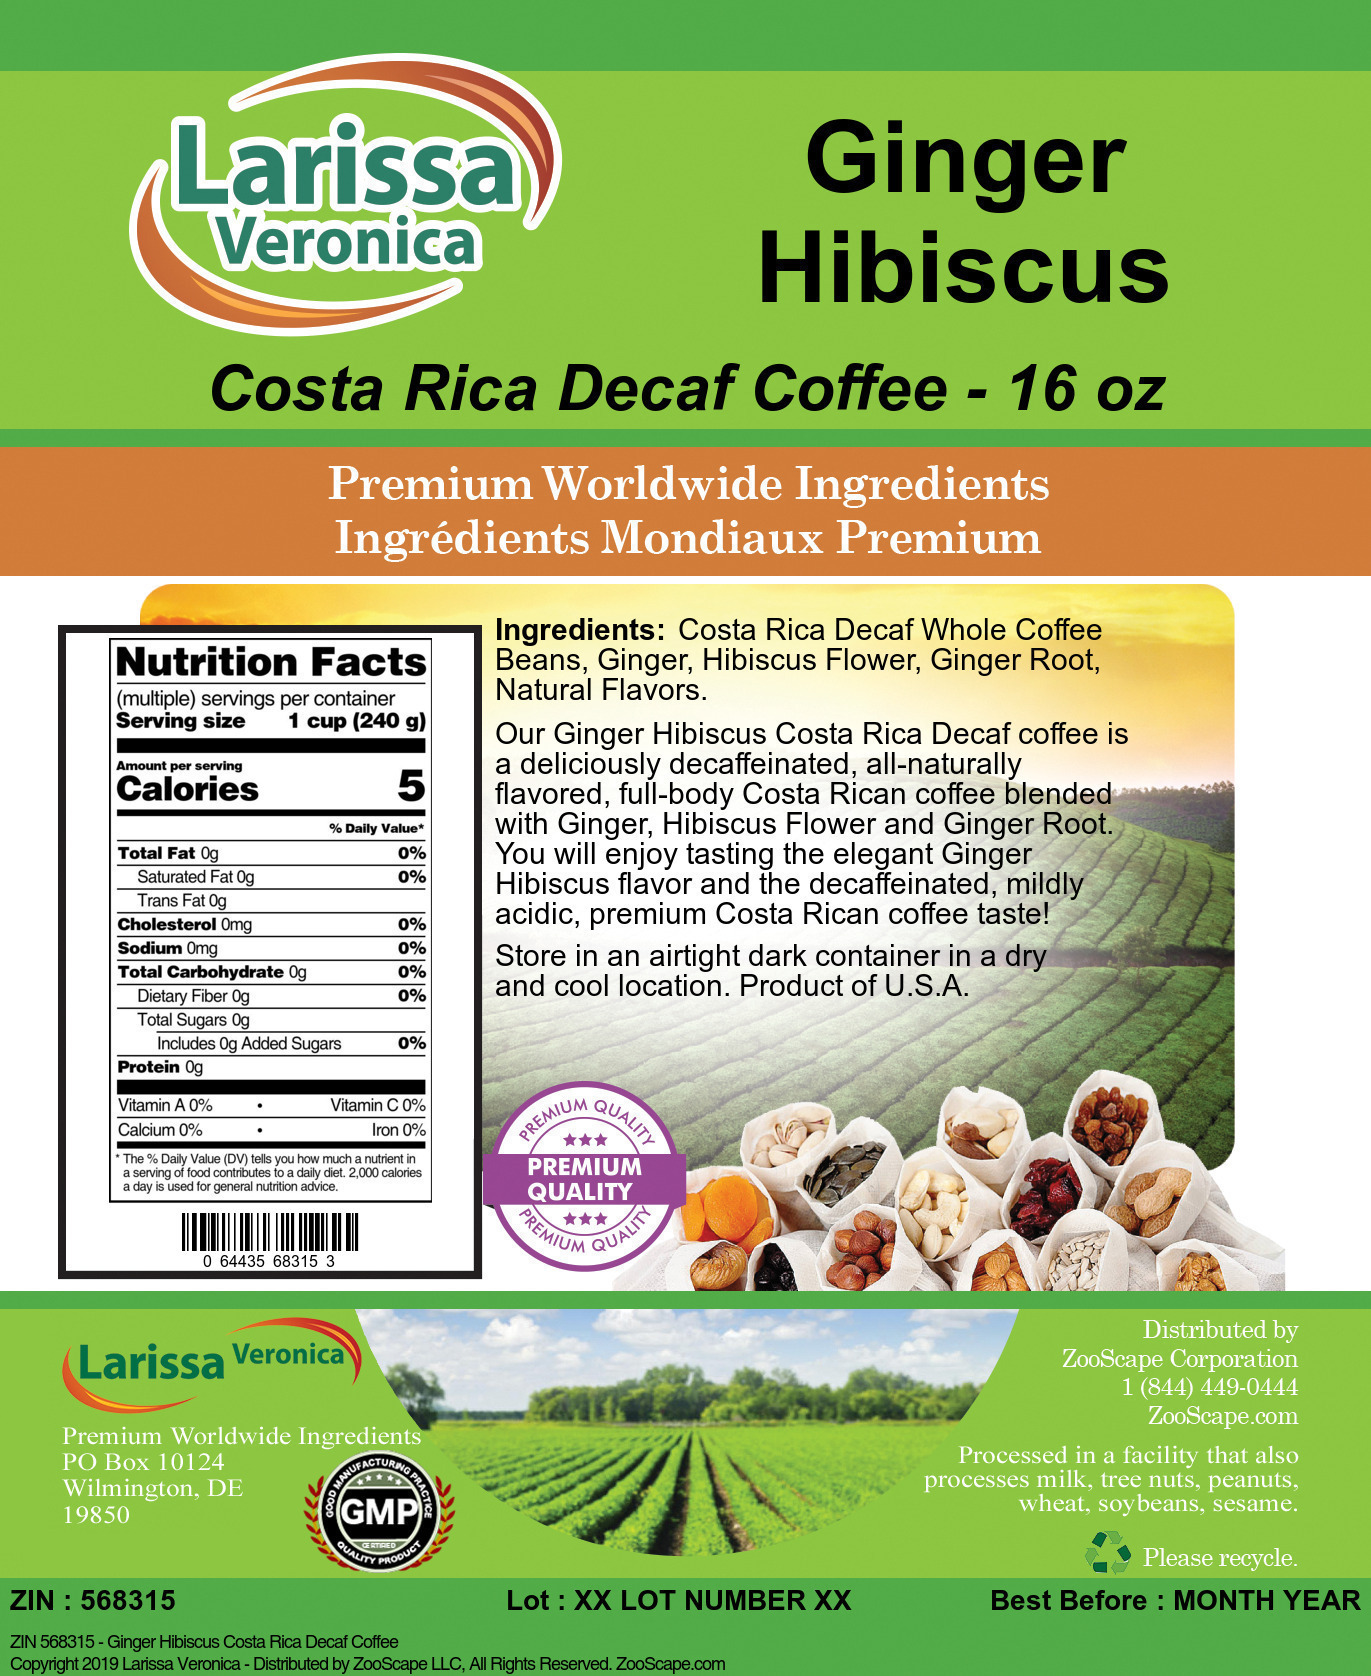 Ginger Hibiscus Costa Rica Decaf Coffee - Label